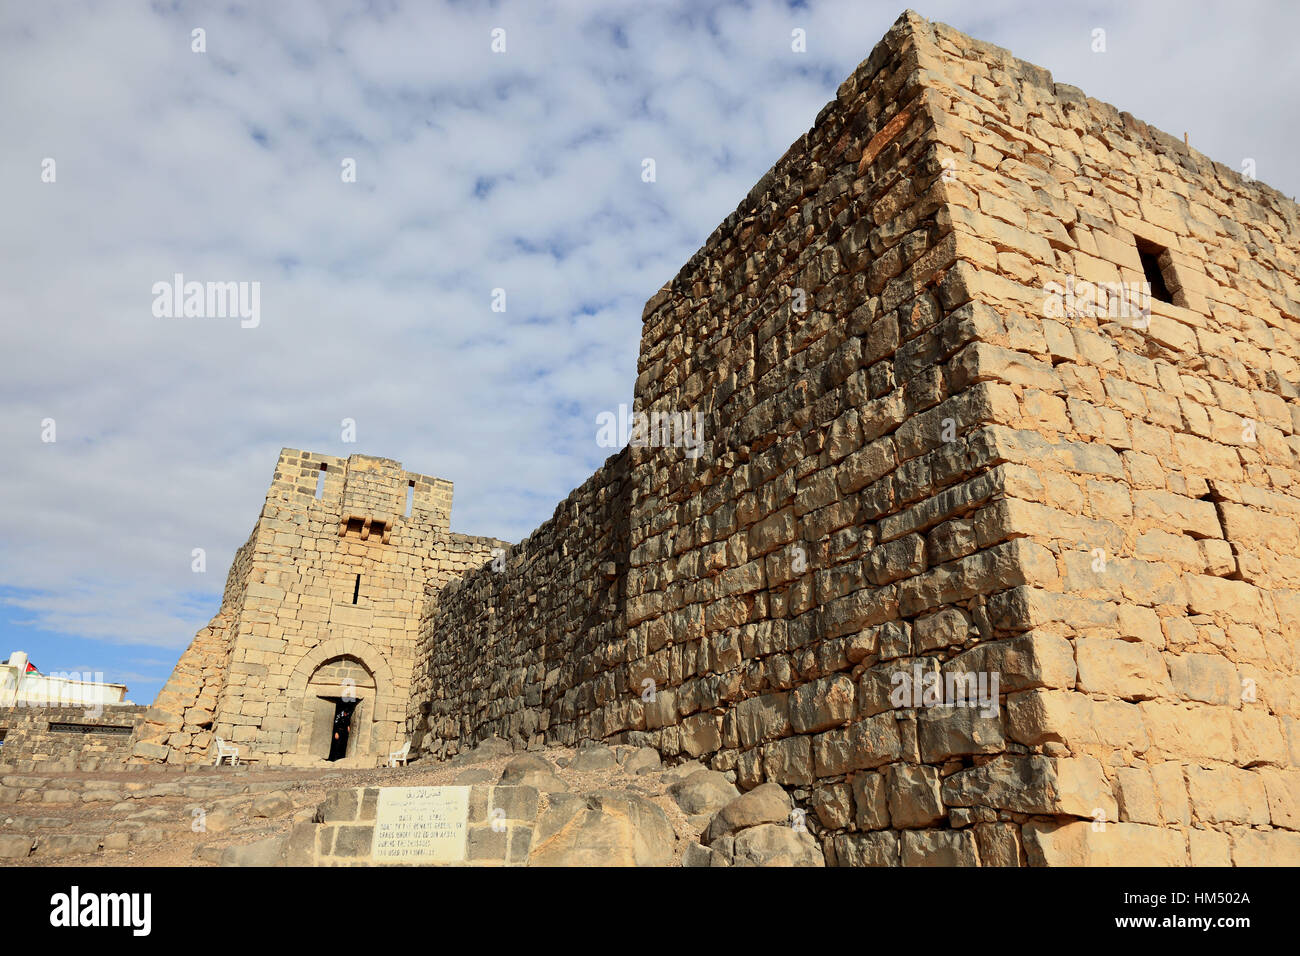 Qasr al-Azraq, Blue Fortress, a large fortress located in Jordan. It is one of the desert castles. Stock Photo